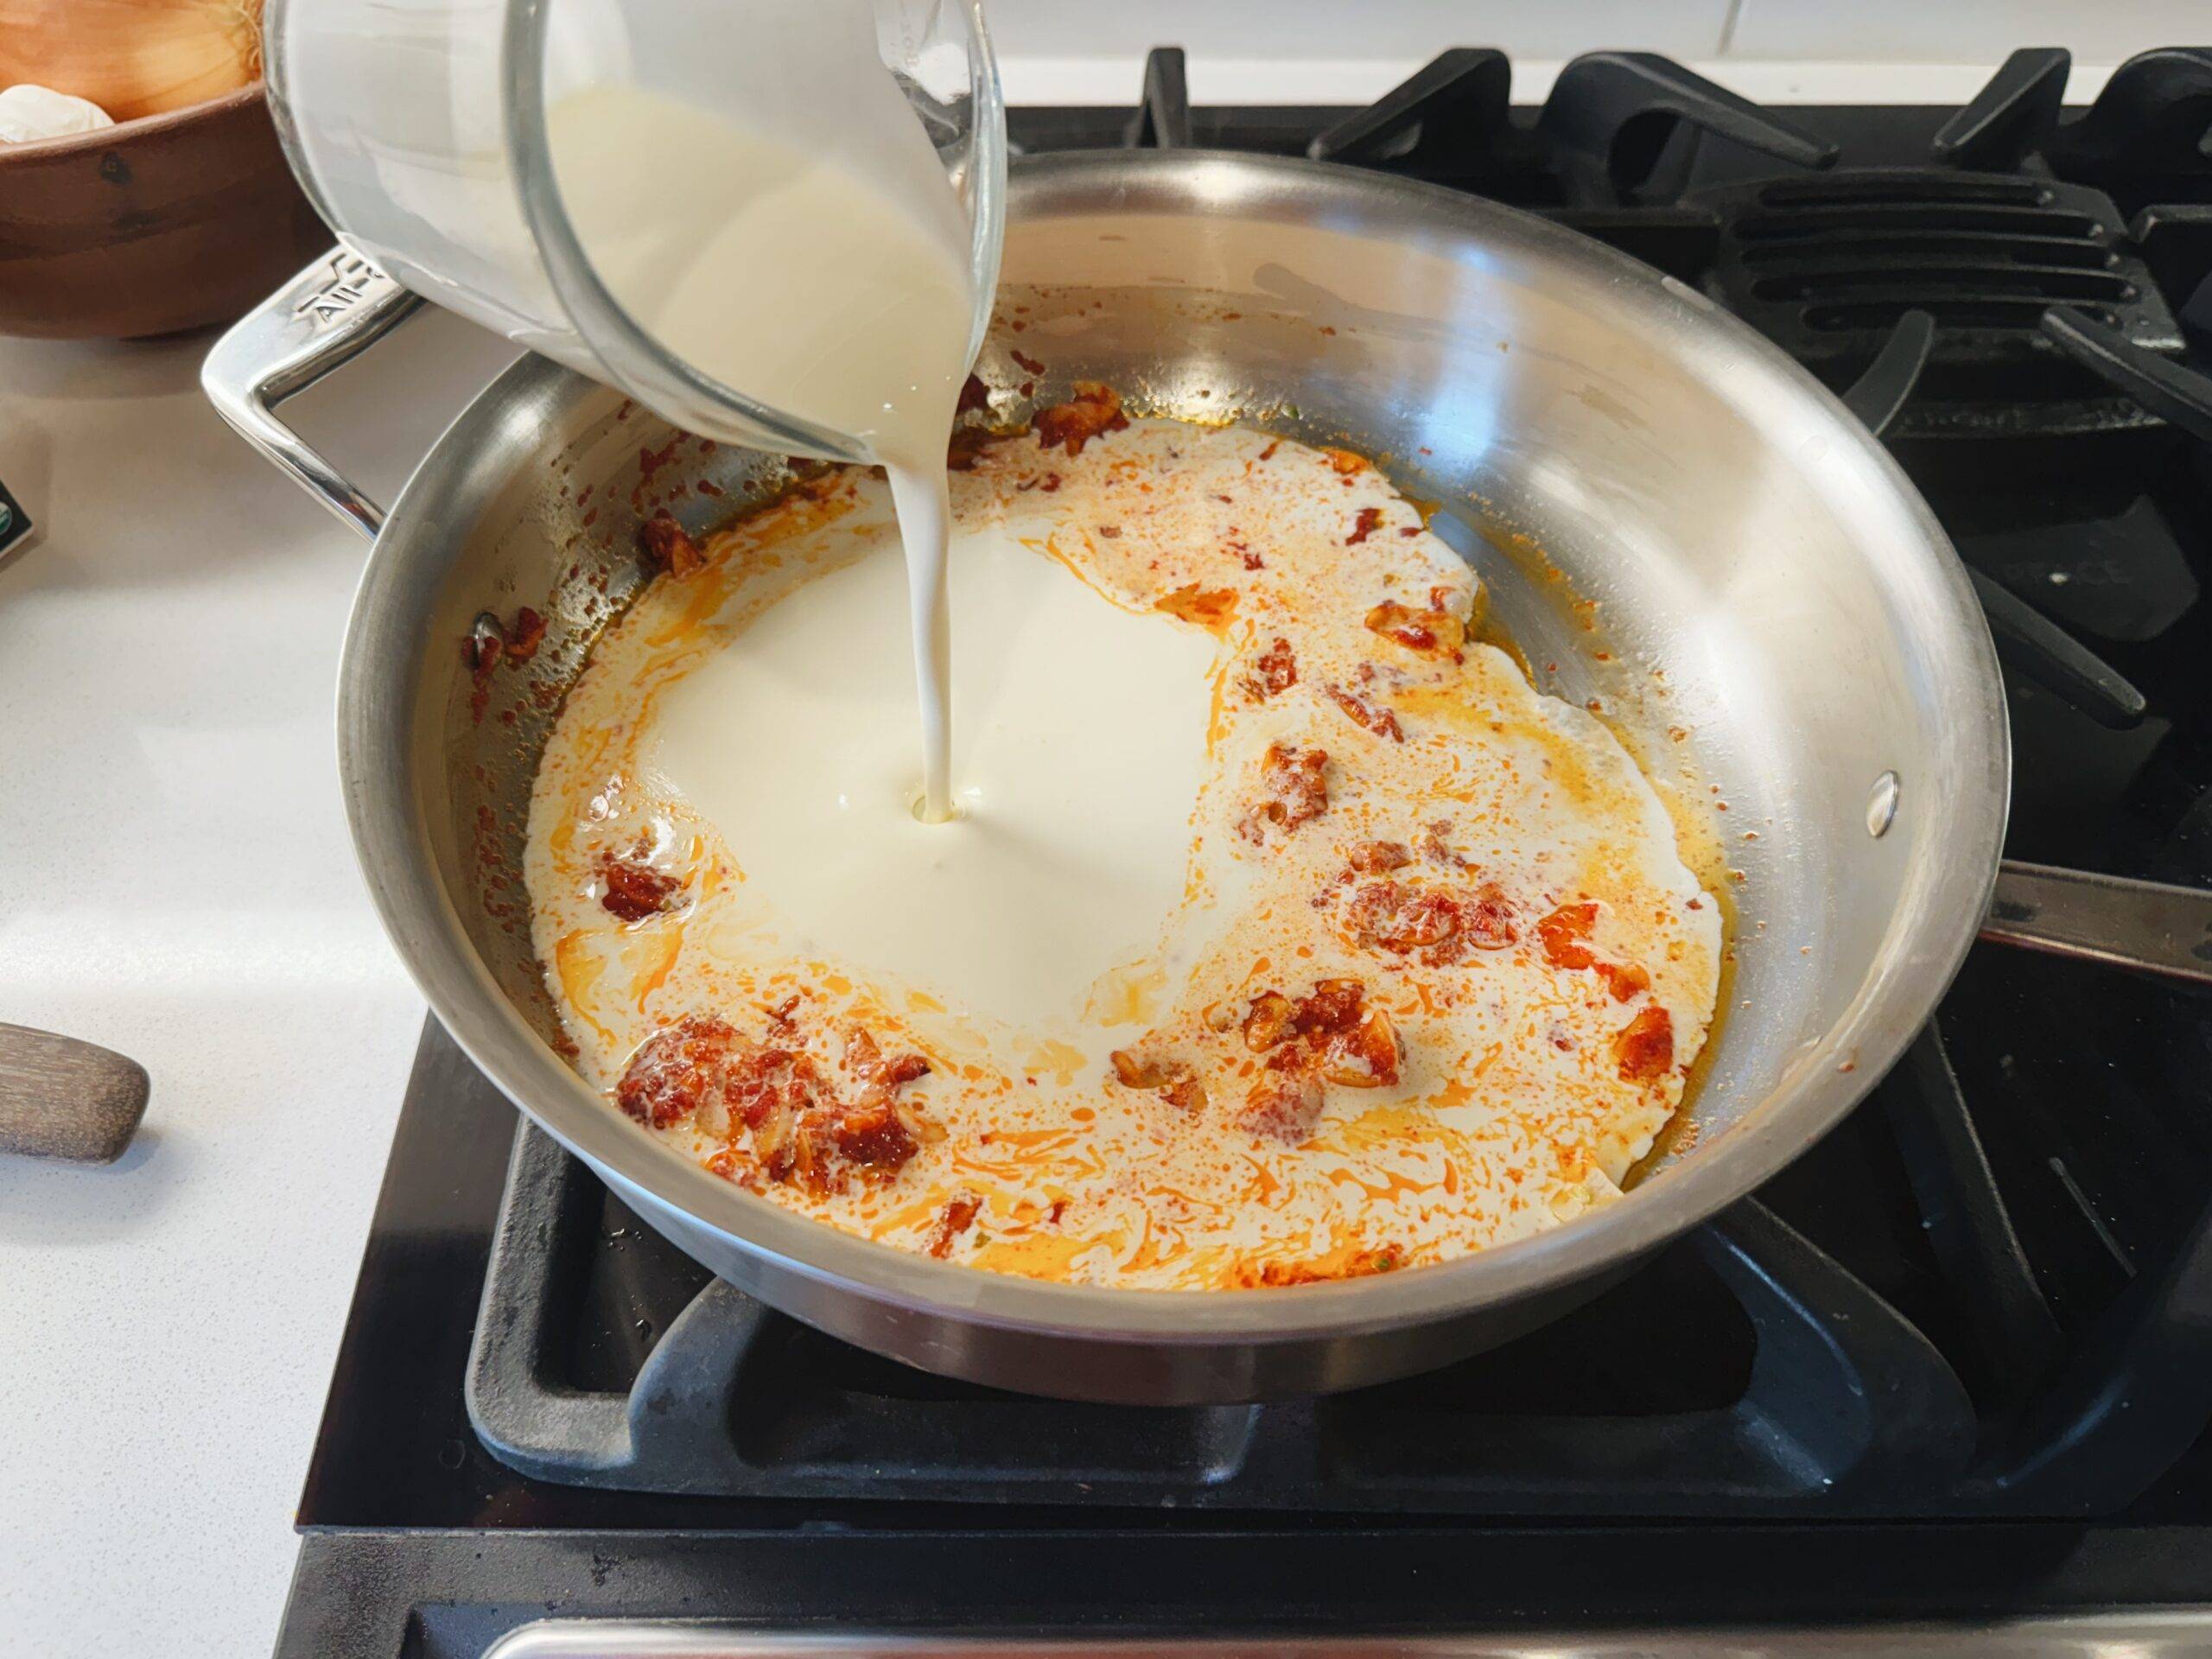 Pouring heavy cream into a pan with tomatoes.